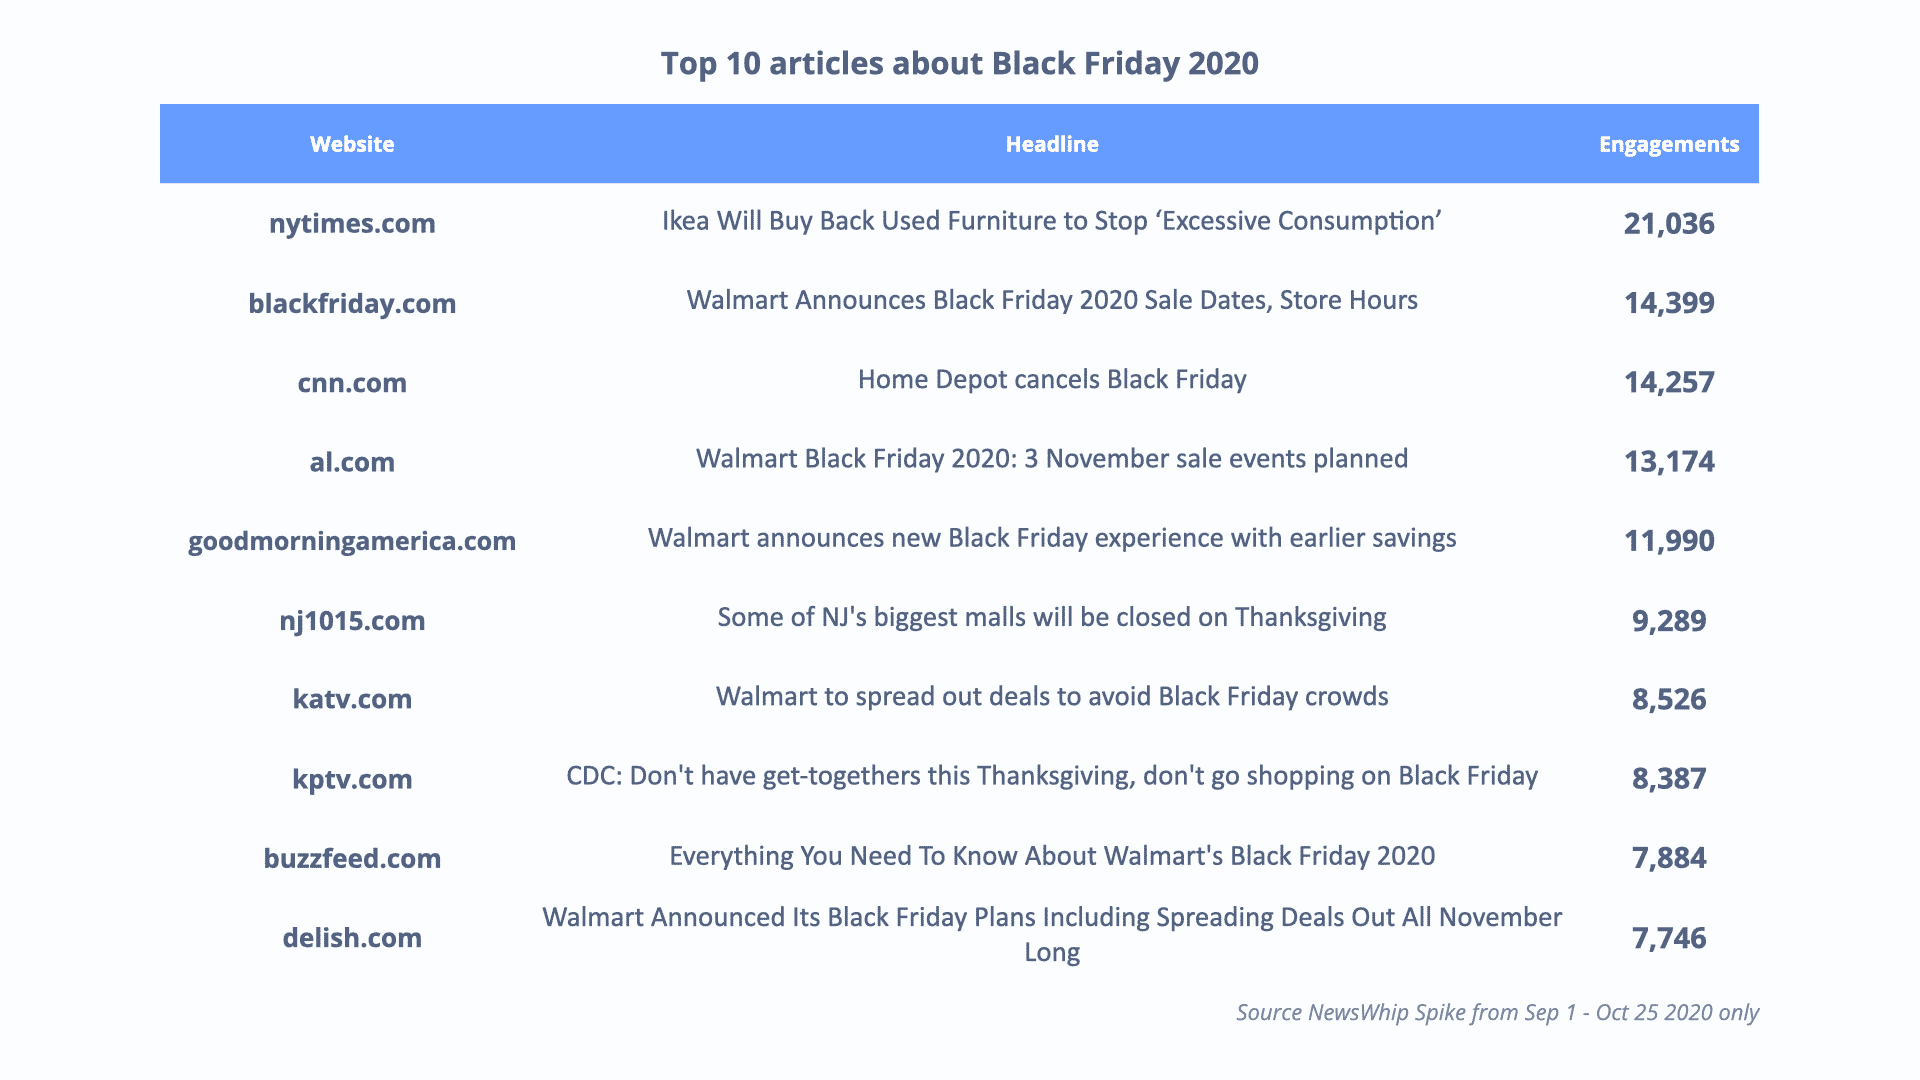 Top articles about Black Friday 2020